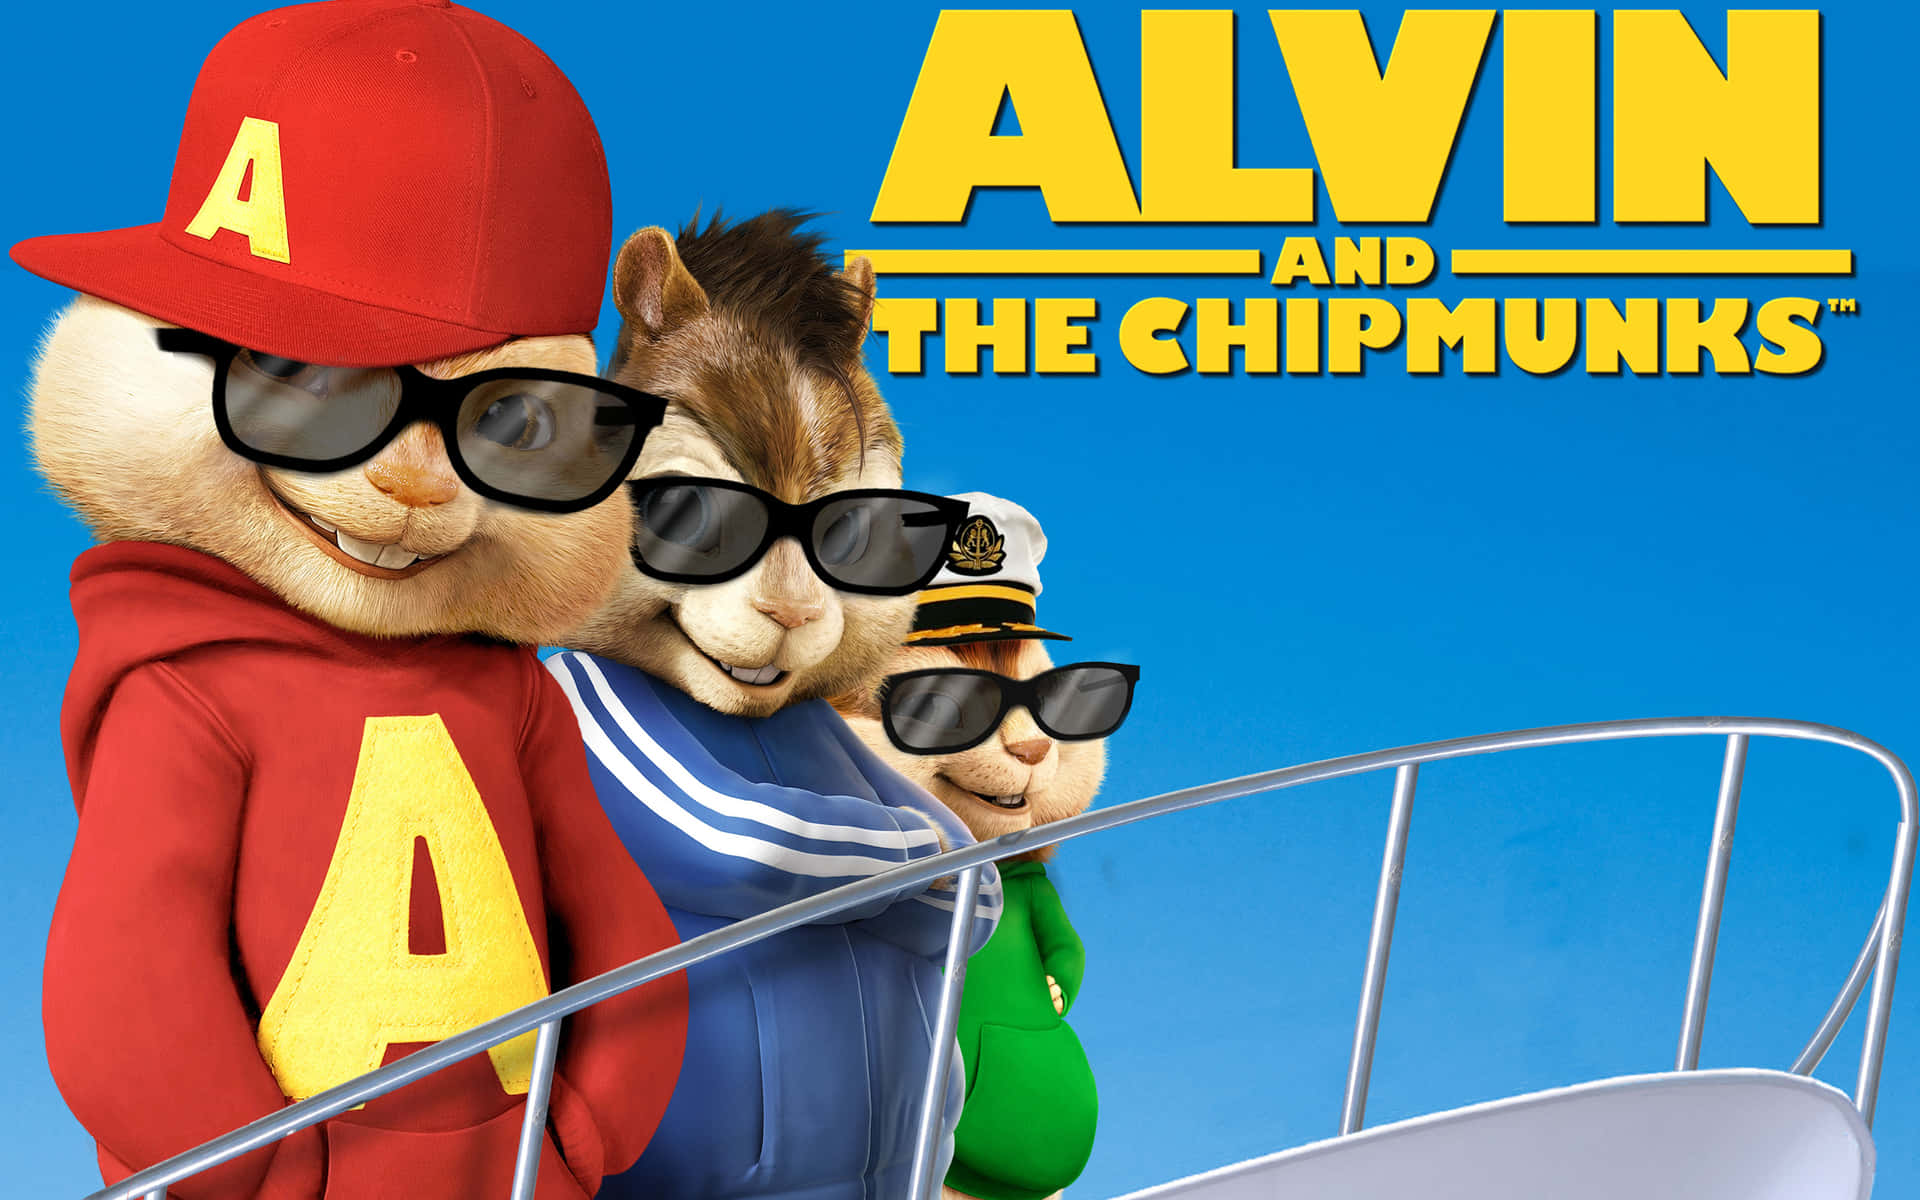 Singing something happy and fun with Alvin and the Chipmunks.